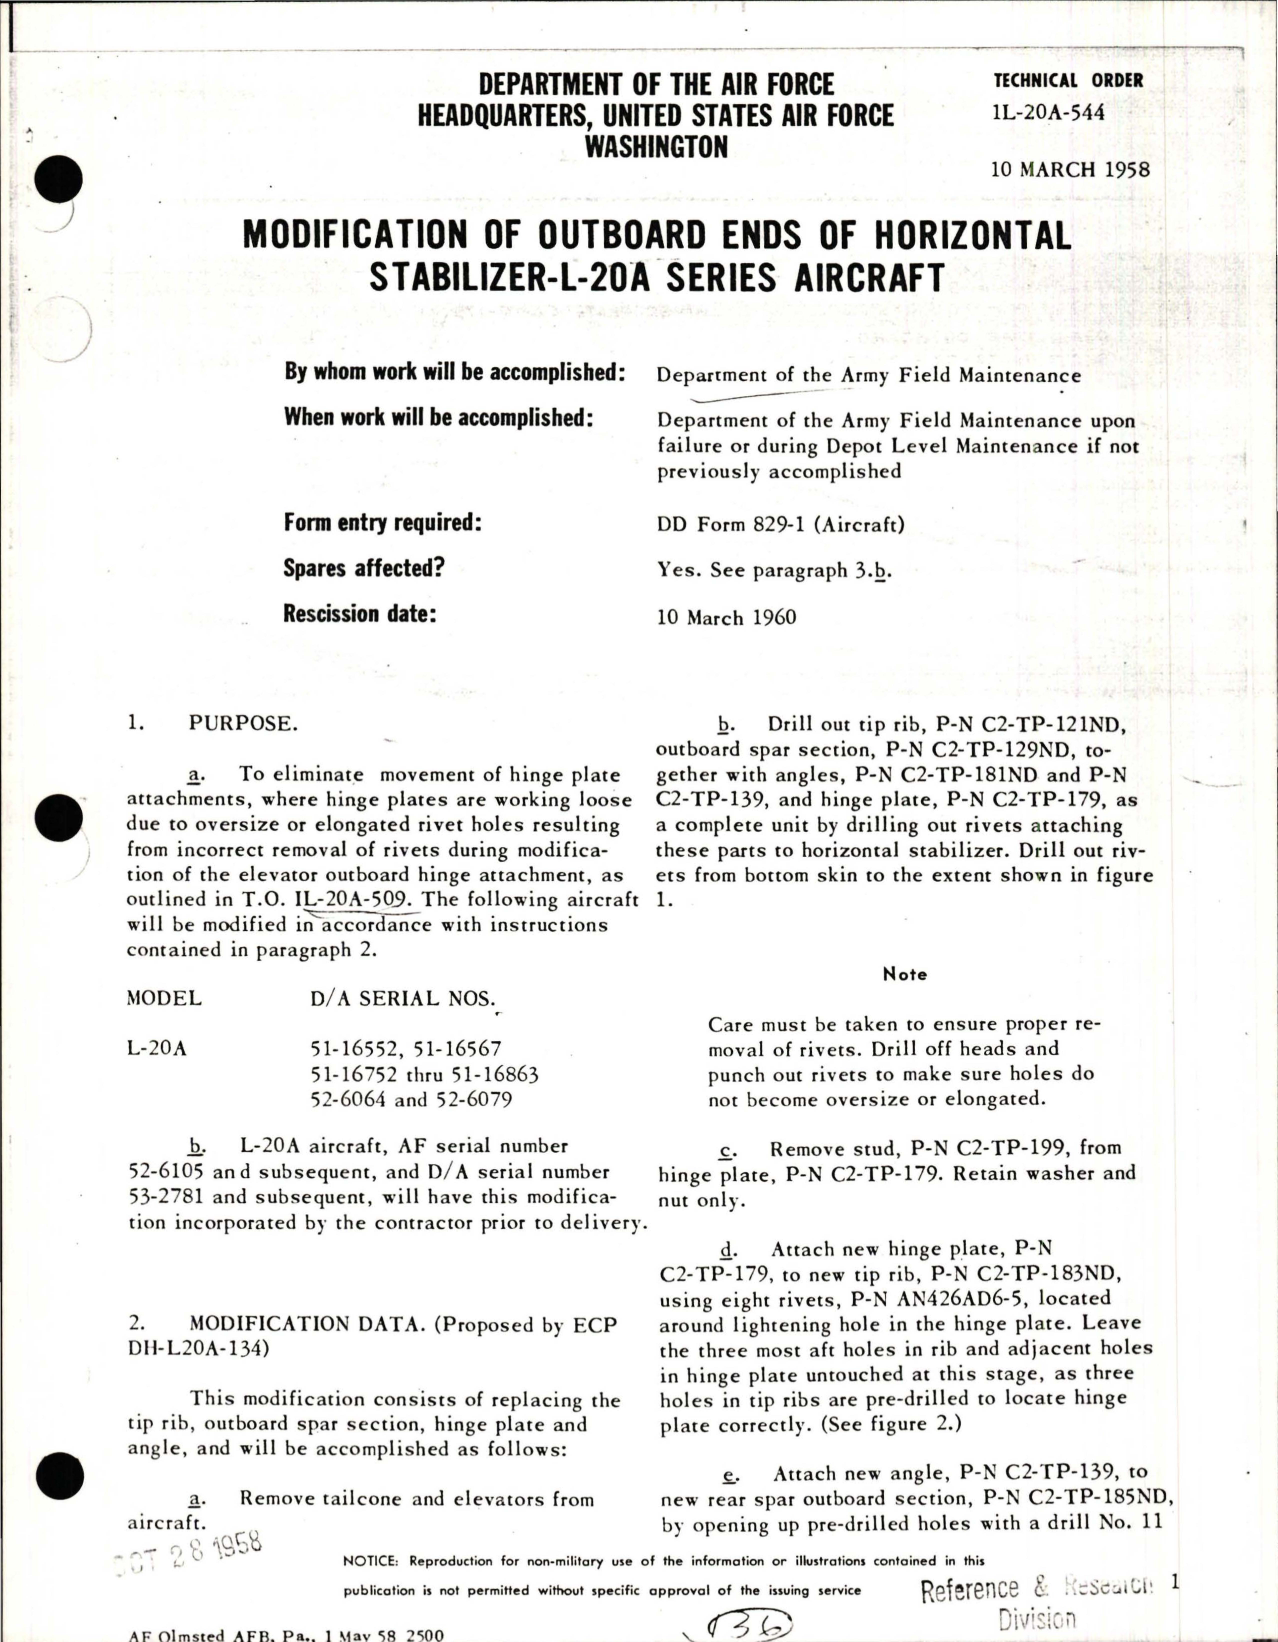 Sample page 1 from AirCorps Library document: Modification of Outboard Ends of Horizontal Stabilizer - L-20A Series